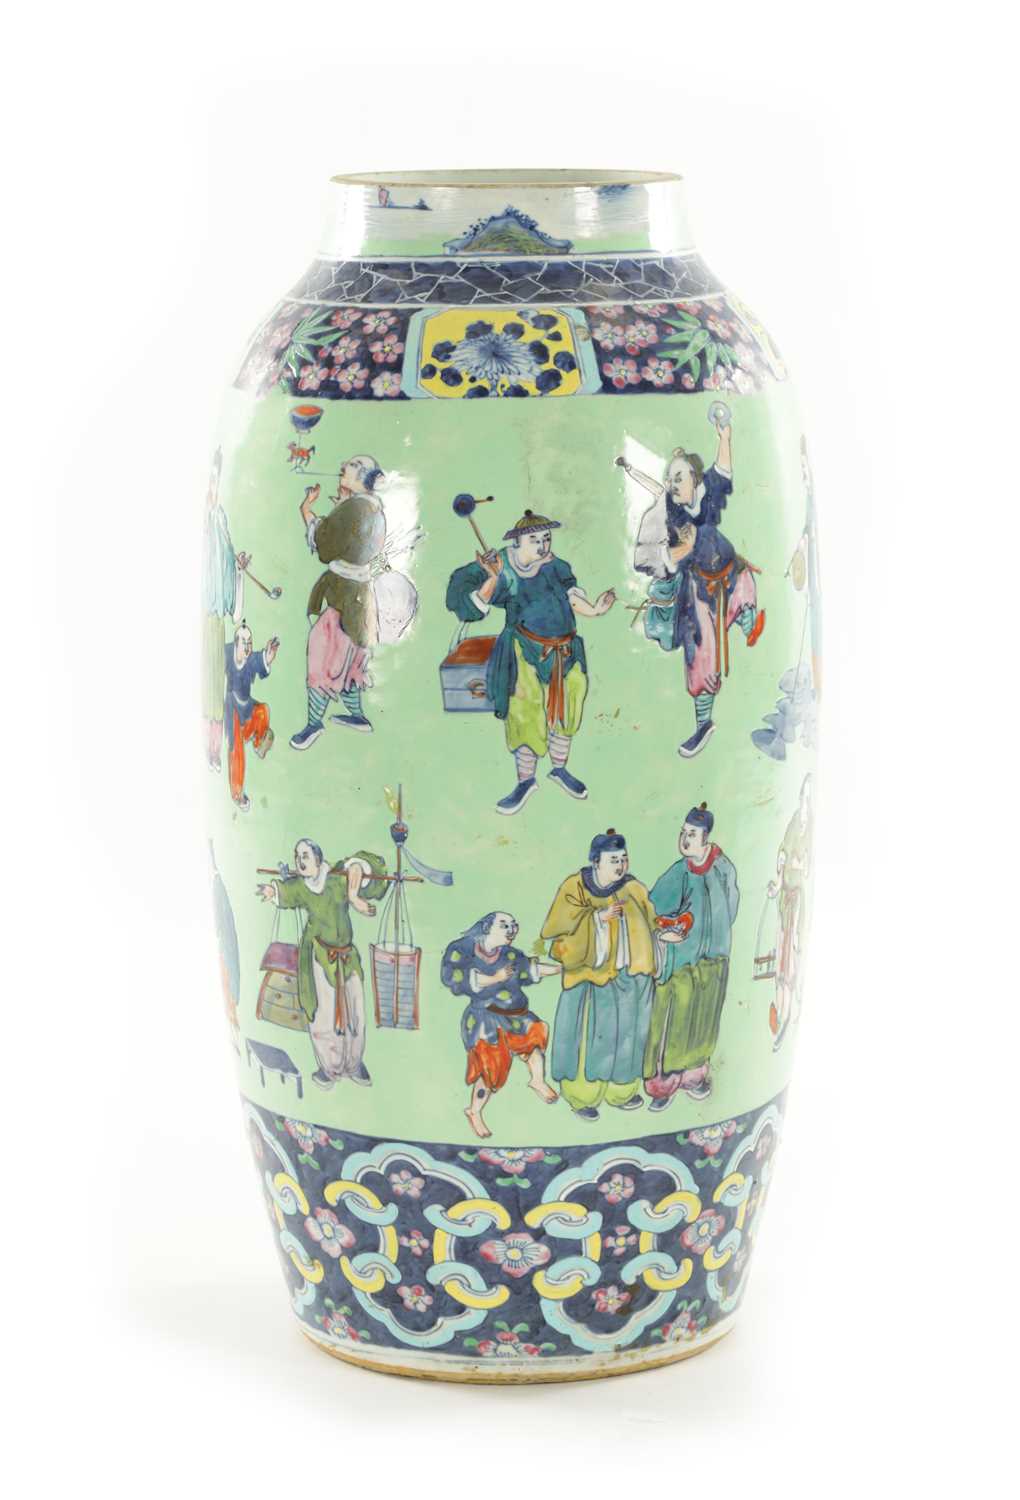 Lot 145 - AN 18TH CENTURY CHINESE PORCELAIN VASE OF LARGE SIZE